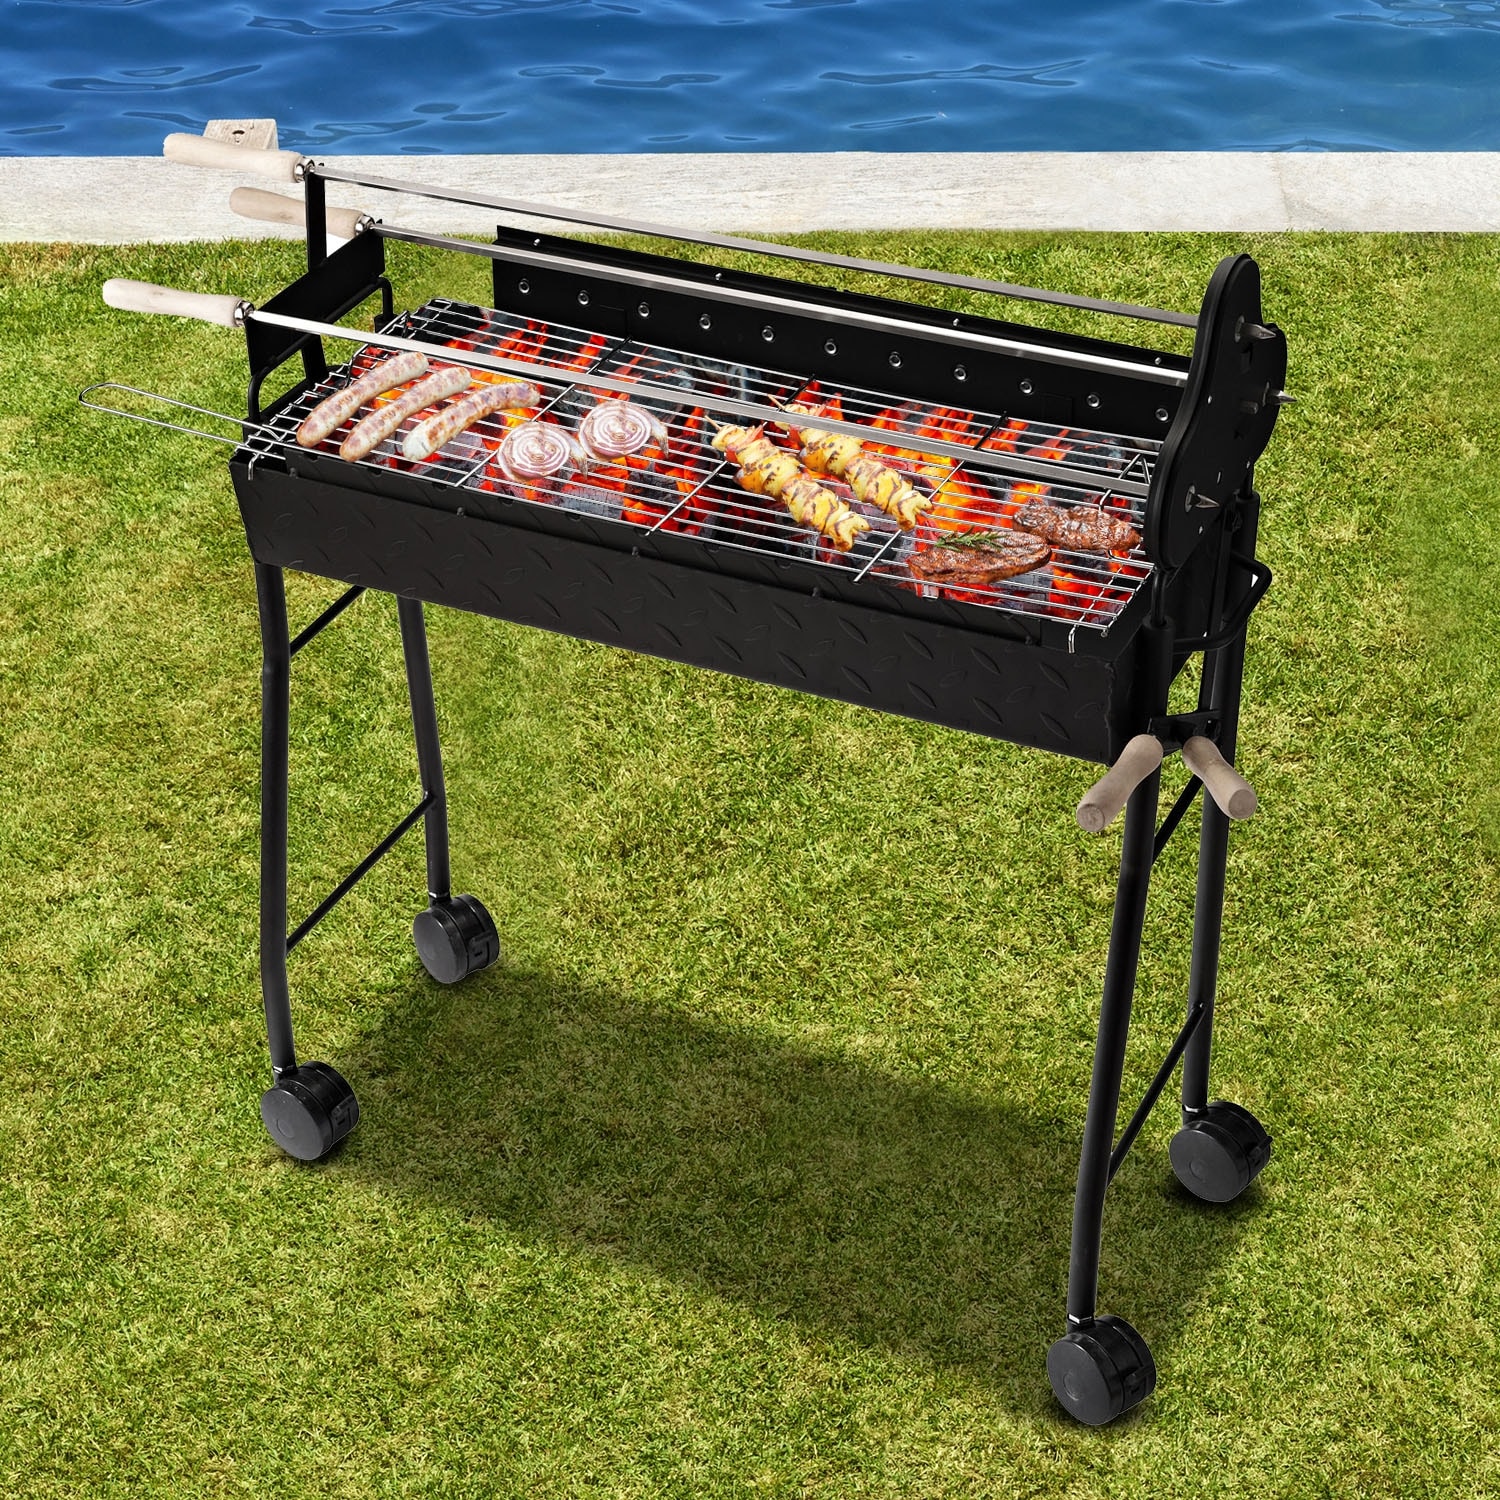 https://ak1.ostkcdn.com/images/products/is/images/direct/0ea25131d23b583110a51893e030e52ddbfc31ba/Outsunny-2-in-1-Portable-Rotisserie-Charcoal-BBQ-Grill-with-Large-Small-Skewers-Included-and-4-Wheels-for-Portability.jpg